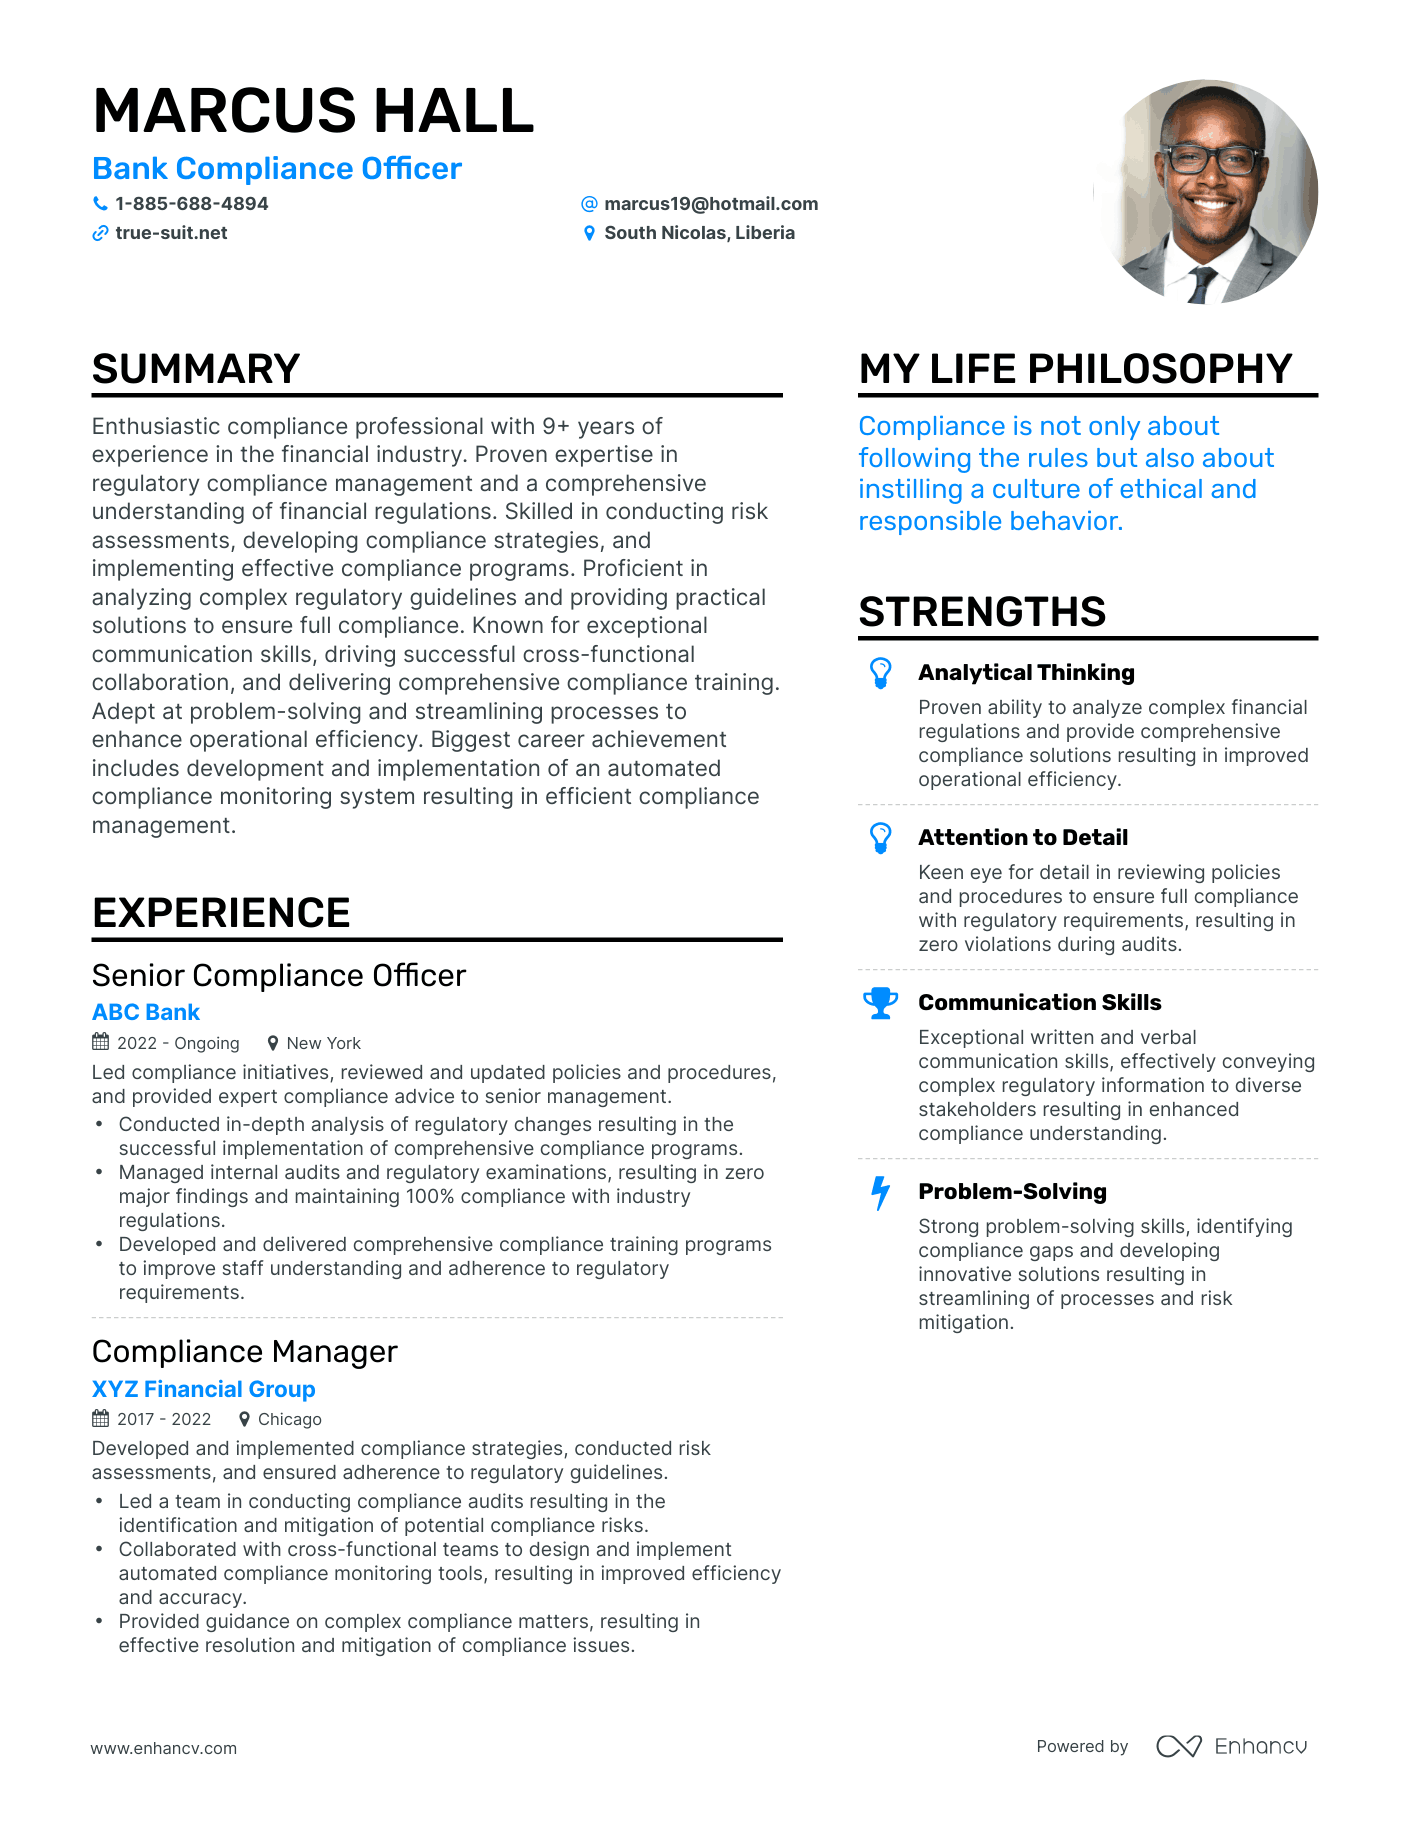 Bank Compliance Officer resume example